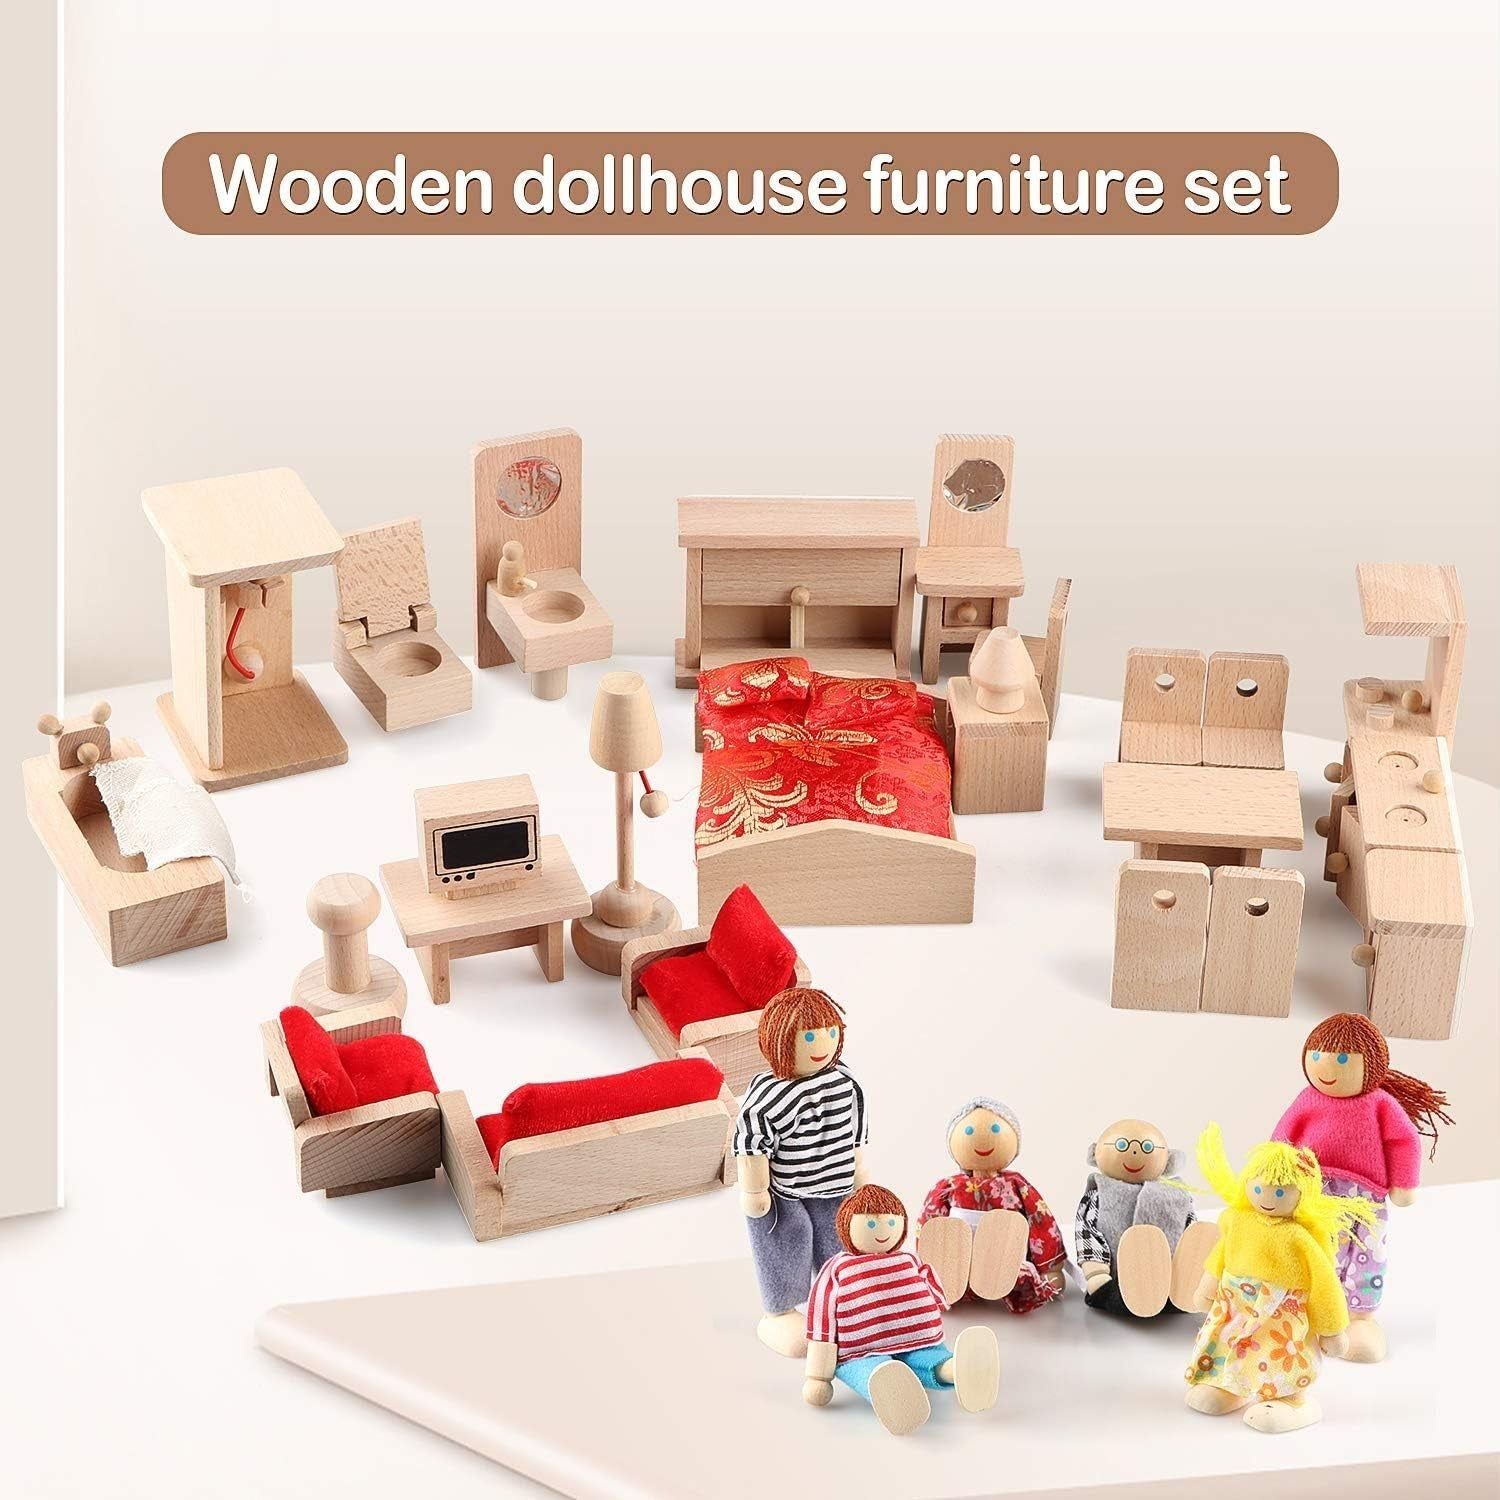 5 Set Dollhouse Furniture Accessories Wooden Bathroom/Living Room/Dining Room/Bedroom/Kitchen House 6 Family Doll Decoration Pretend Play Kids Christmas Birthday Gifts for Girls Toys 40 Pcs